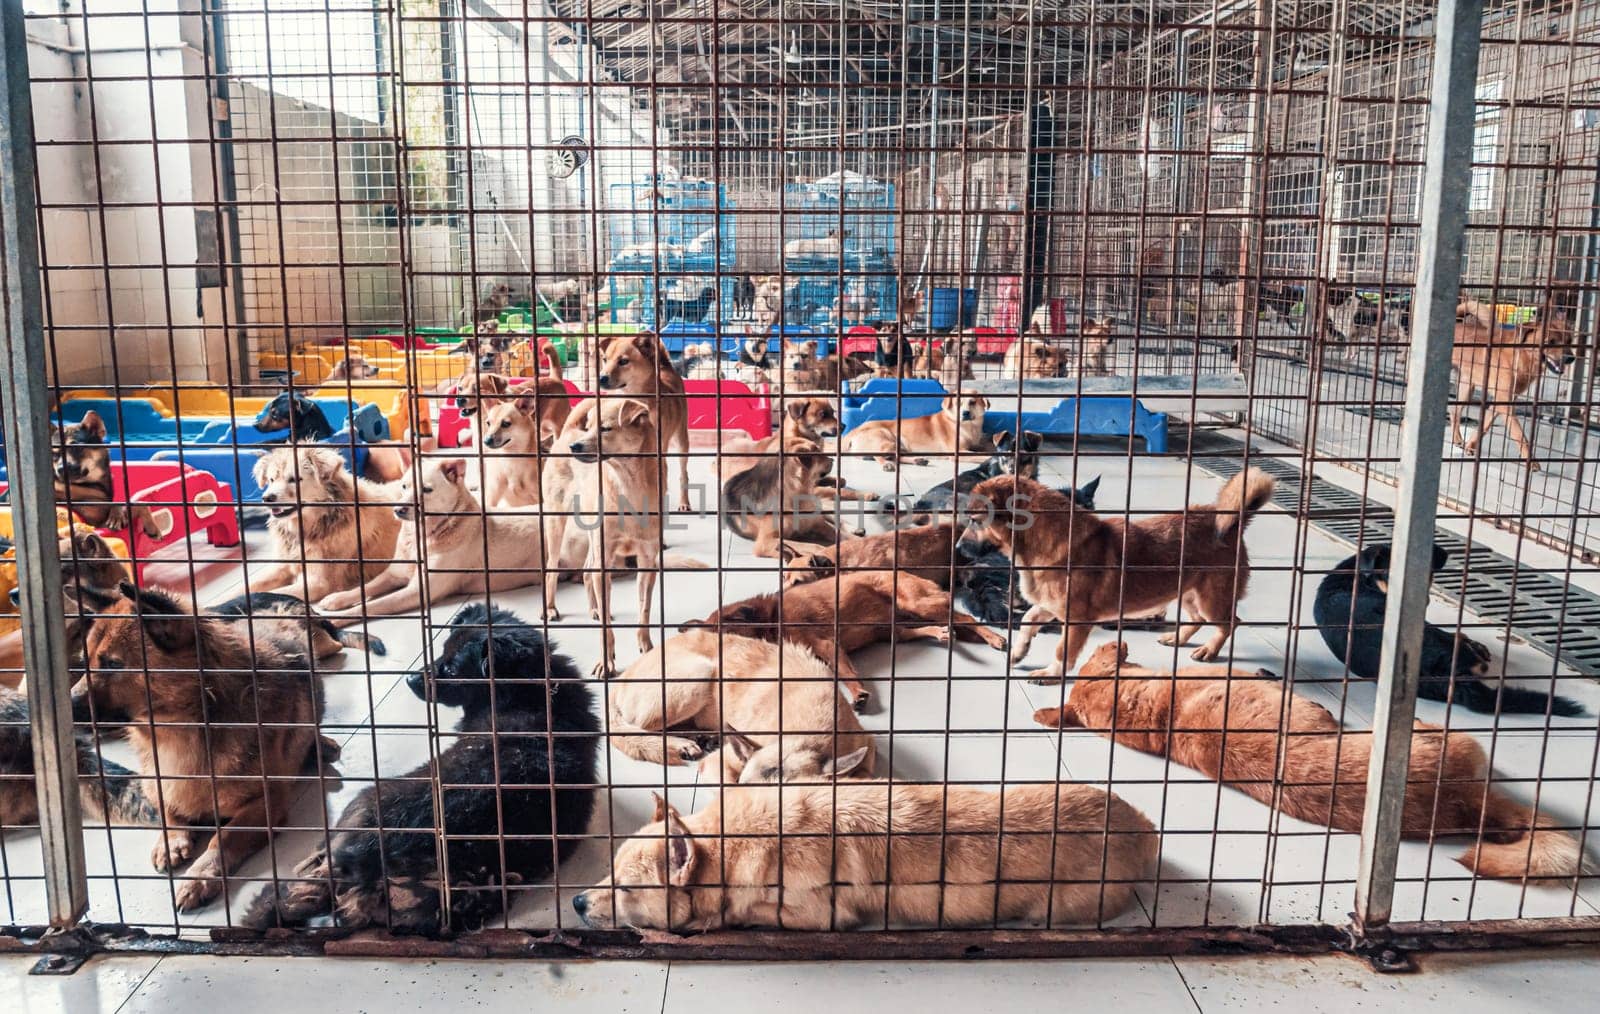 Sad dogs lying on the floor in shelter behind fence waiting to be rescued and adopted to new home. Shelter for animals concept. by Busker